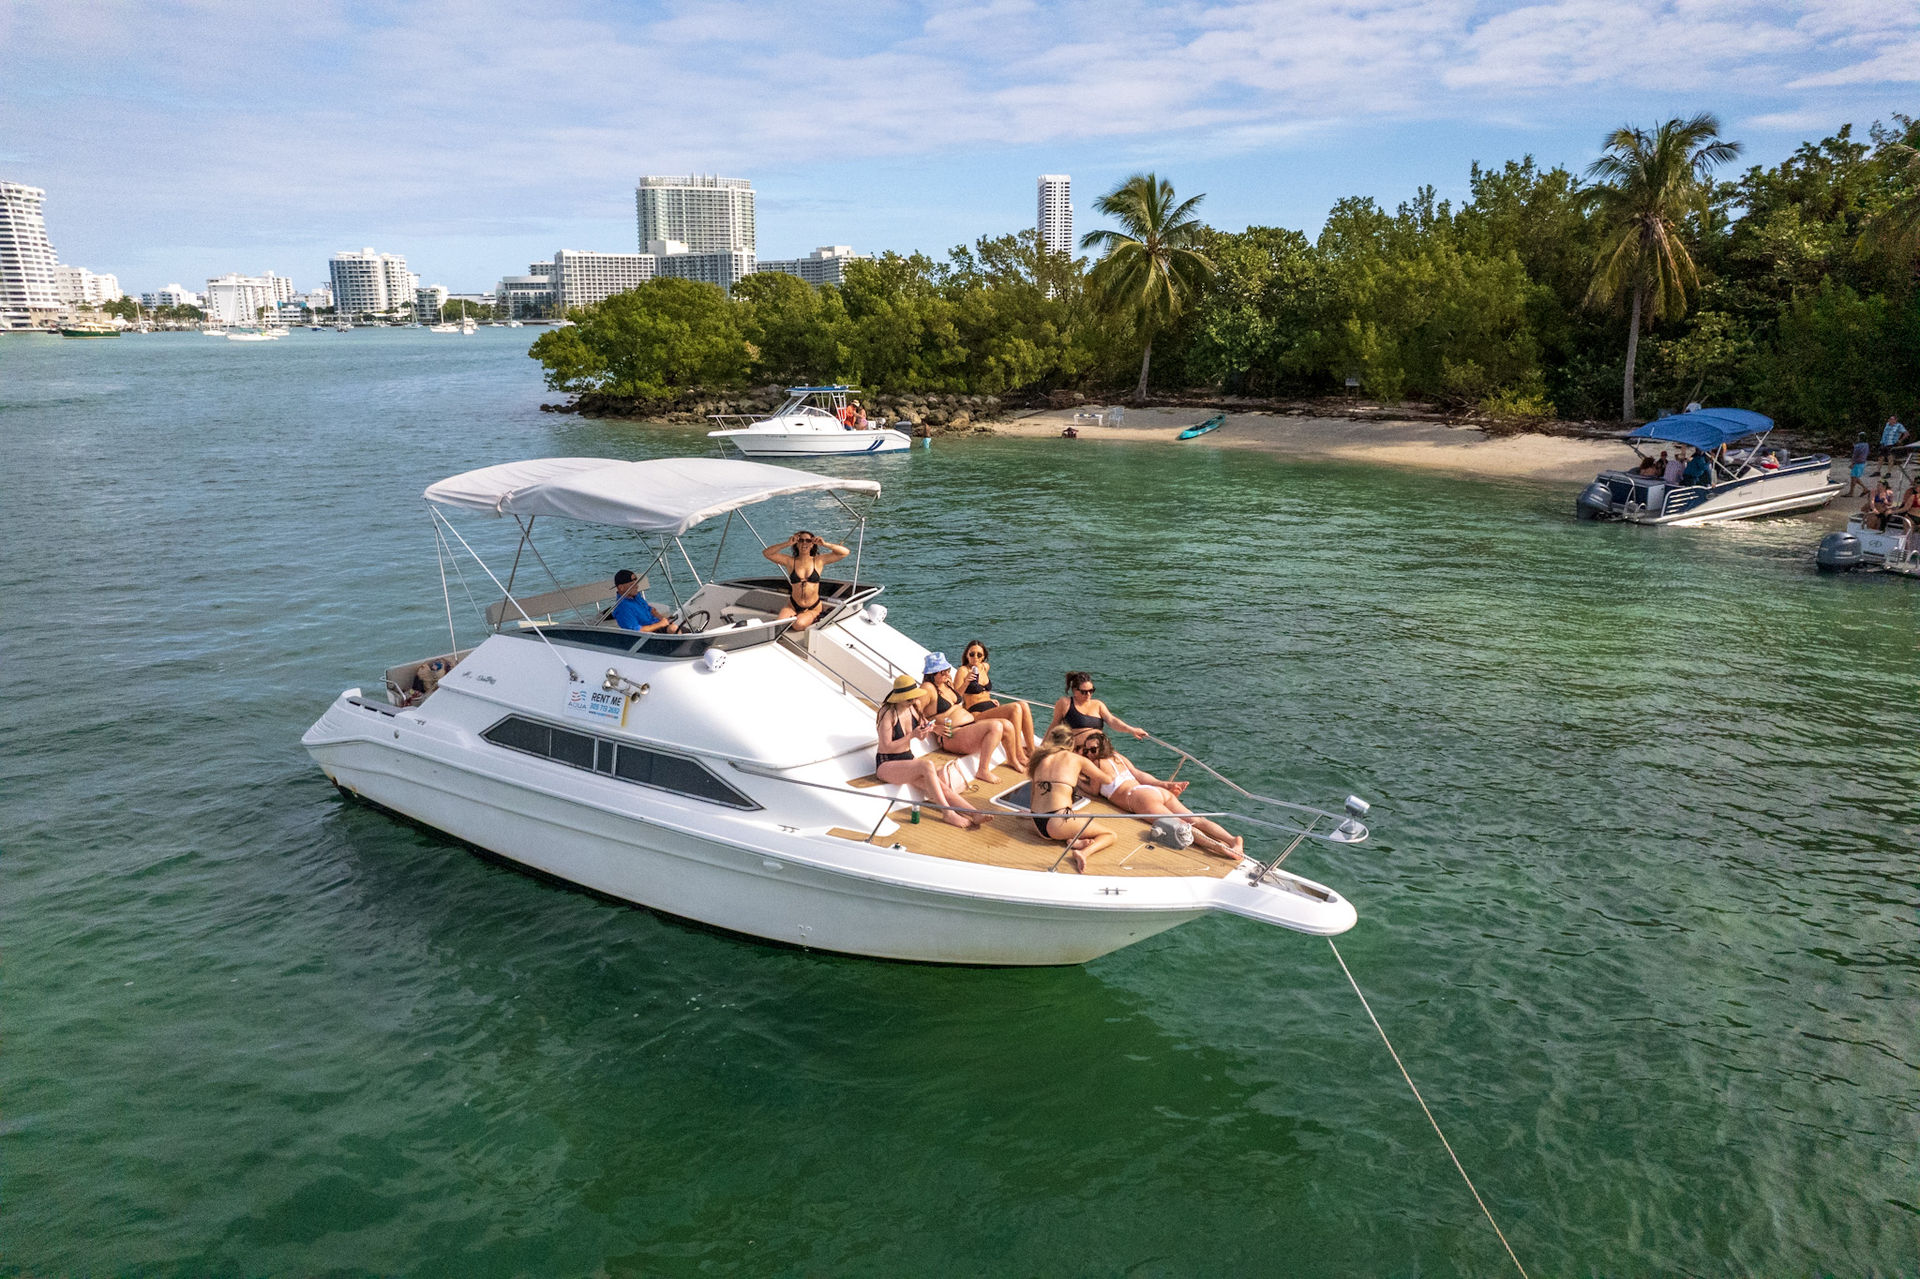 BYOB Yacht Party on Miami's Famous Bay: 2-6 Hours Available, Captain Provided image 6